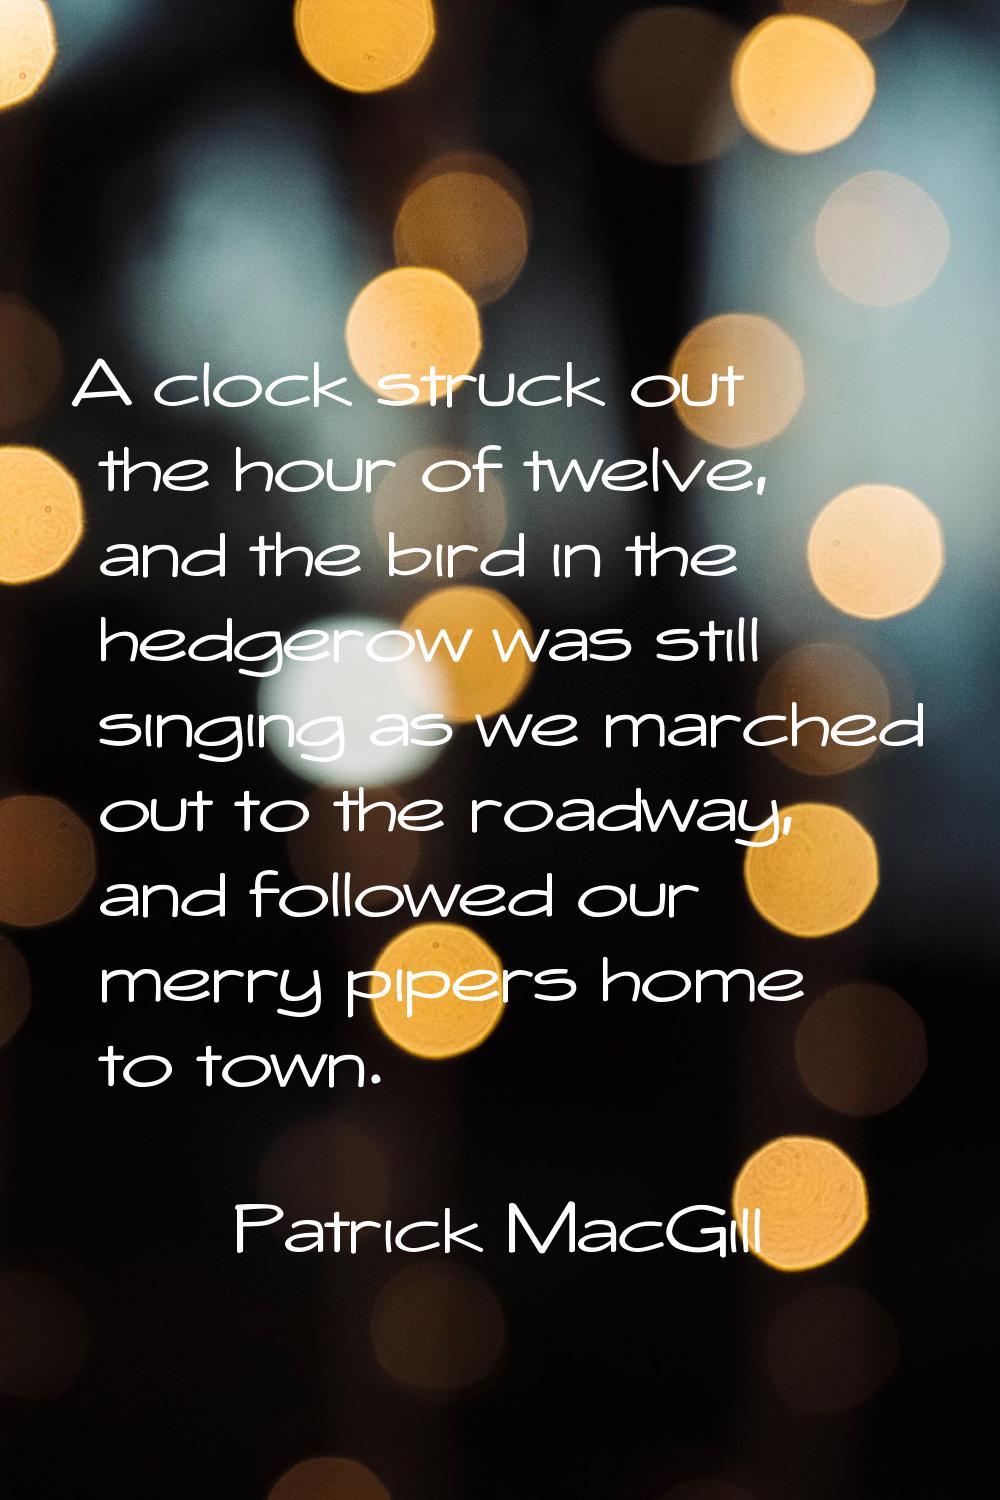 A clock struck out the hour of twelve, and the bird in the hedgerow was still singing as we marched